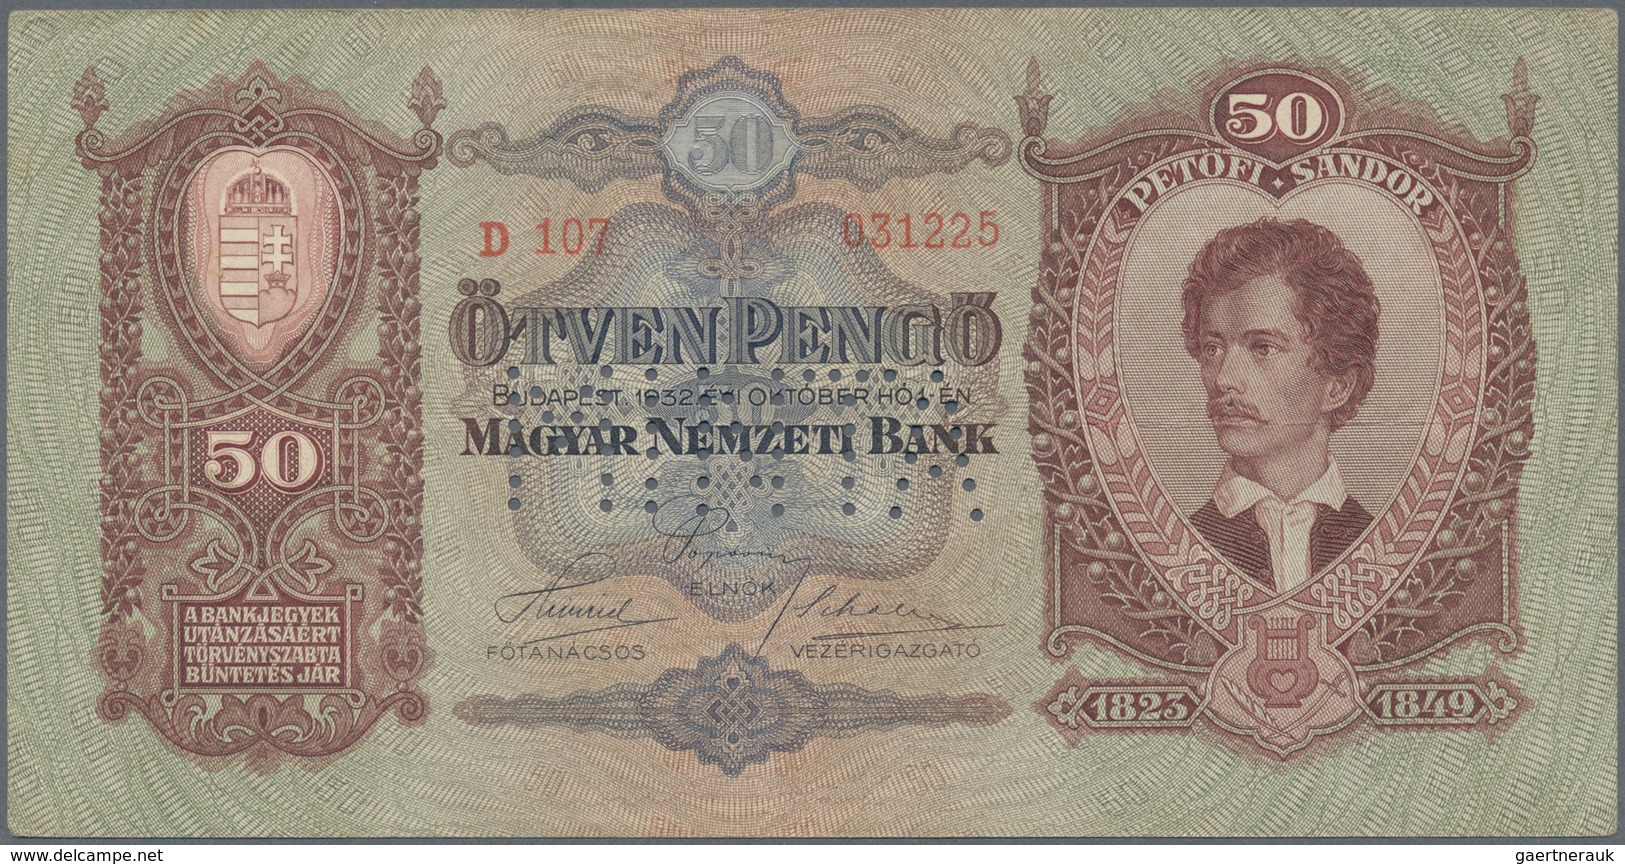 01696 Hungary / Ungarn: 50 Pengö 1932 Specimen, P.99s With Perforation "MINTA" With A Few Vertical Folds A - Hungría